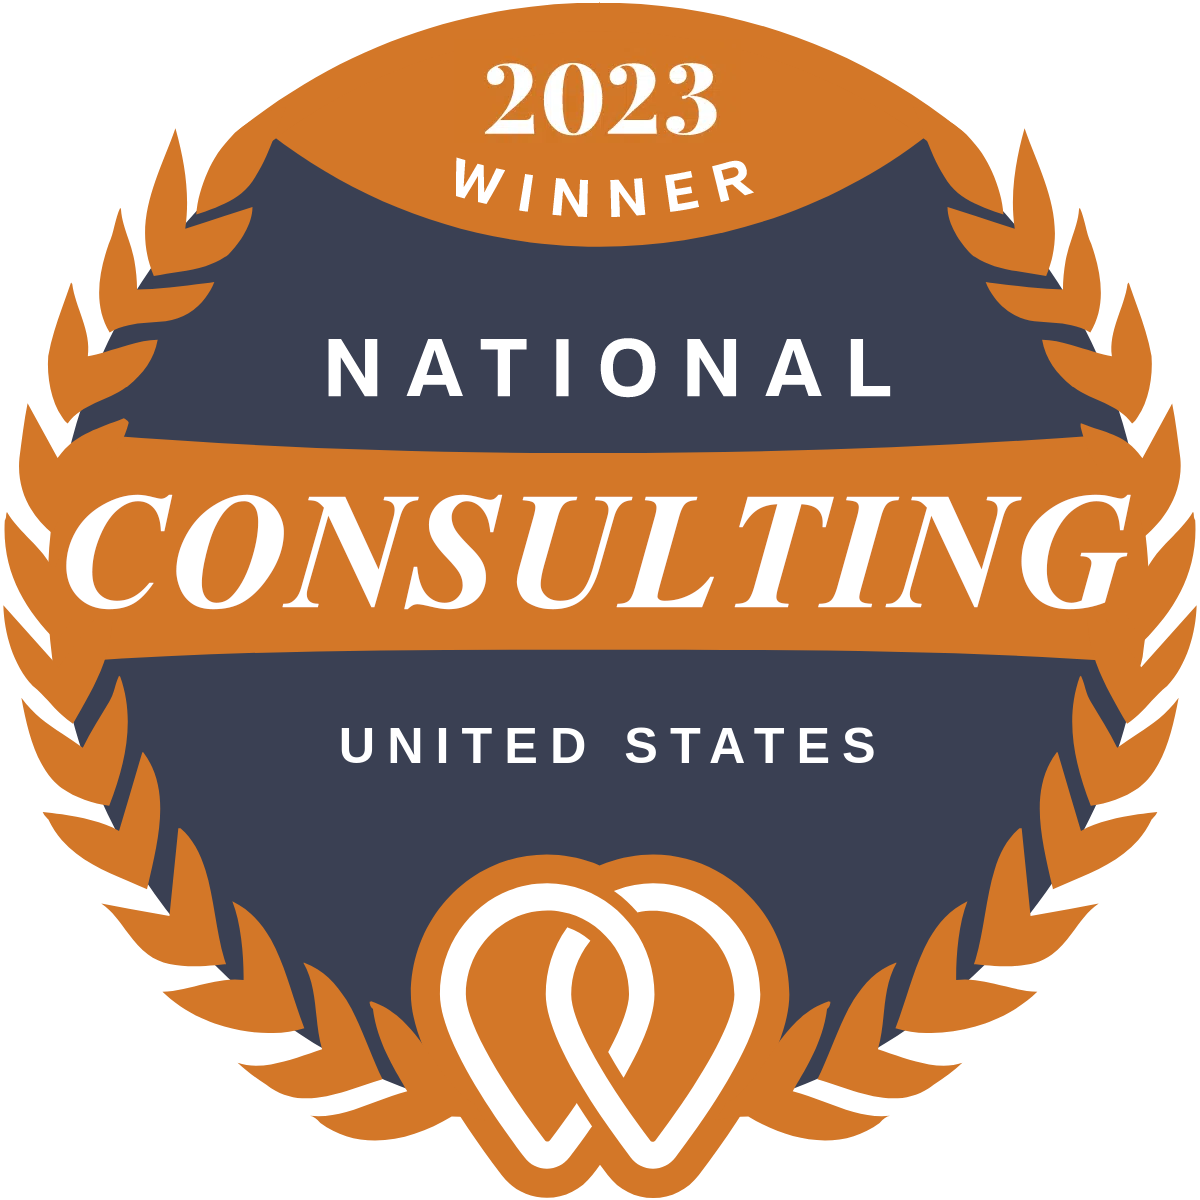 Awarded Top Marketing Consultant in the United States